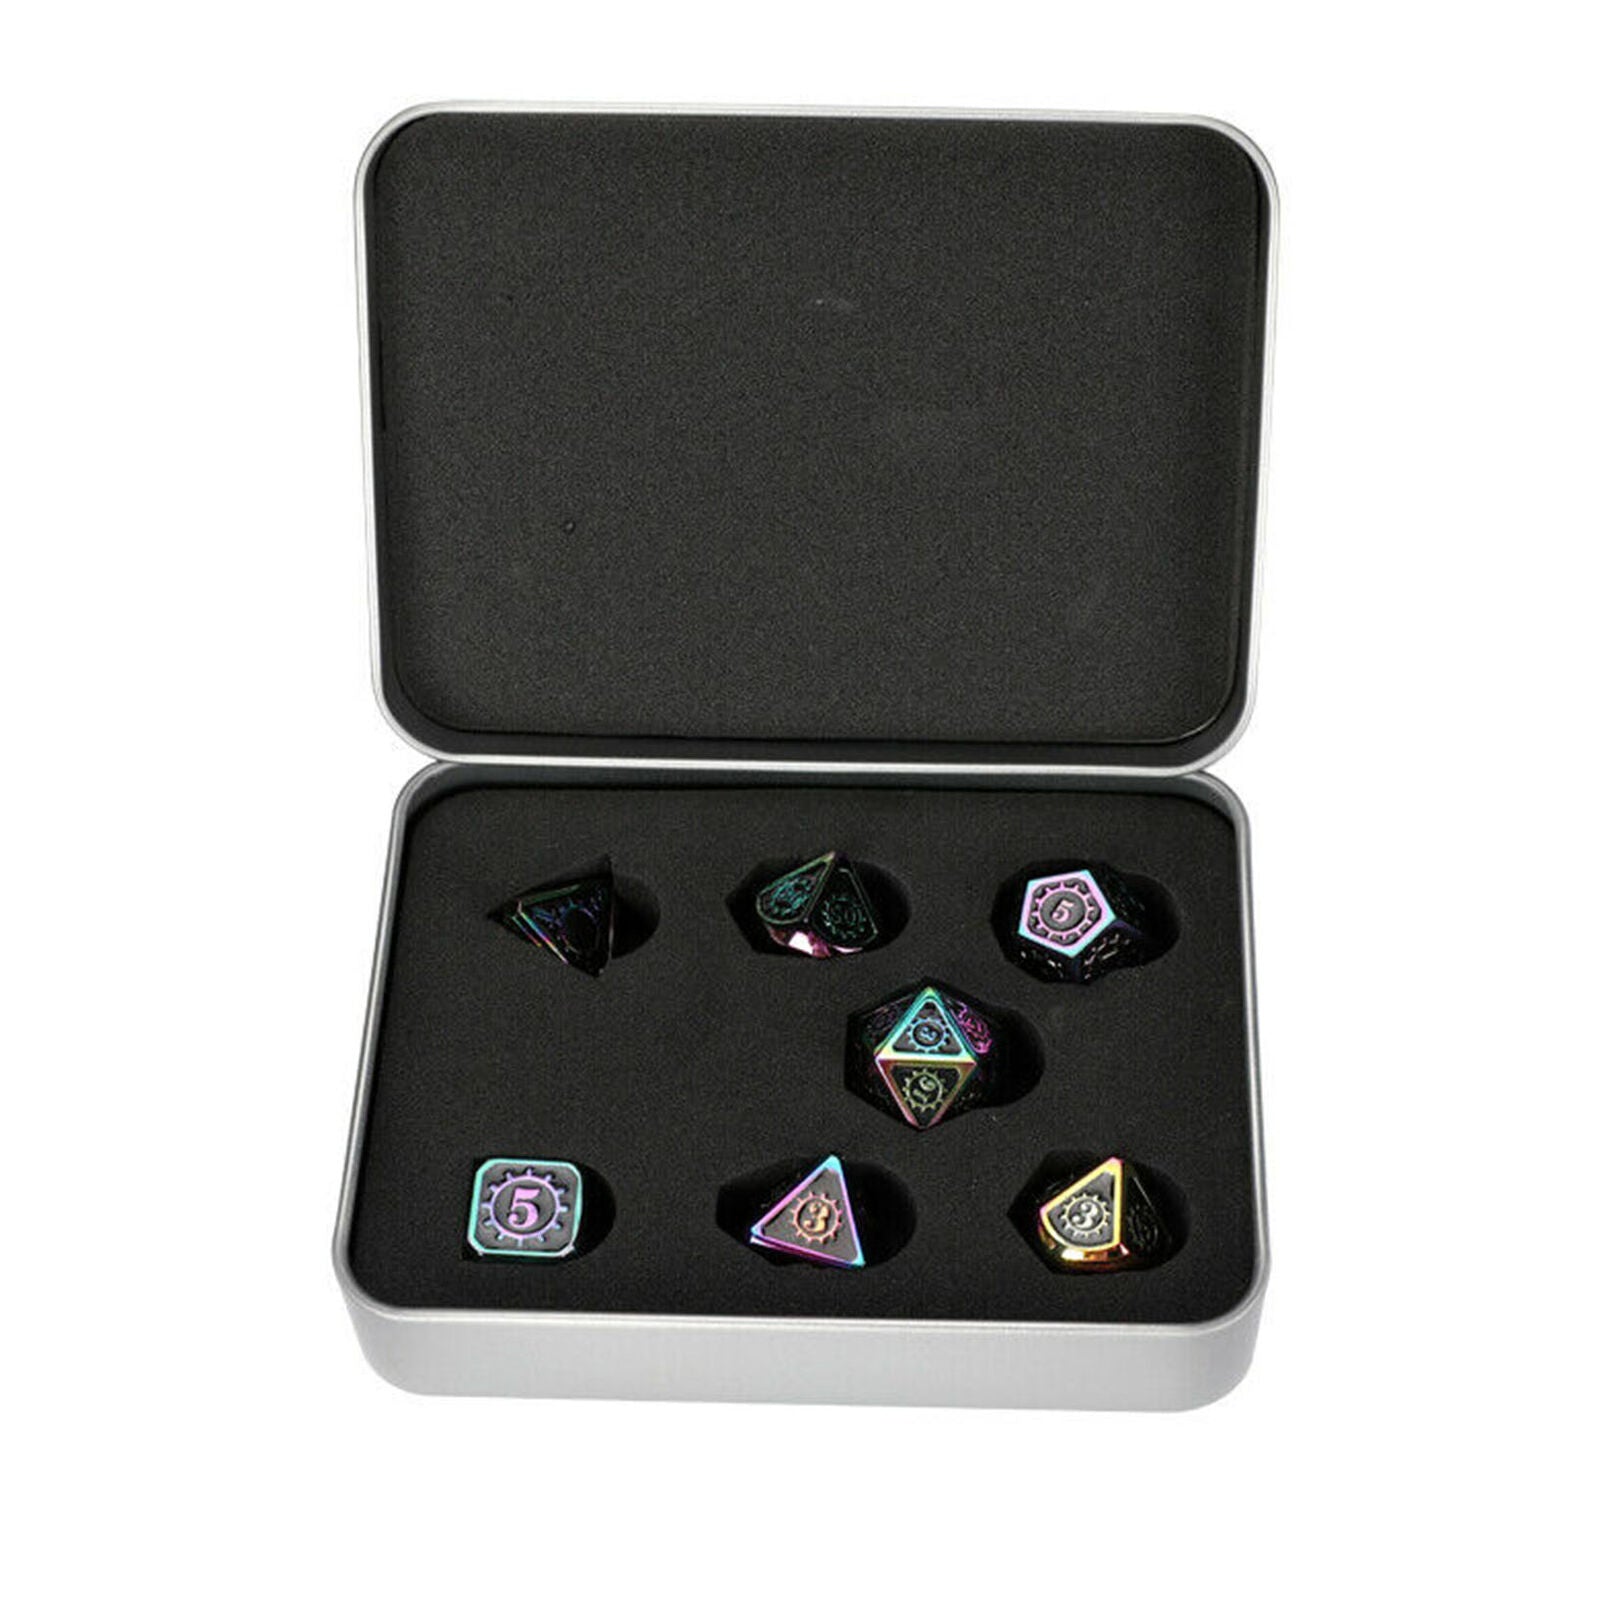 For DND RPG MTG Role Playing Game Rainbow Metal Polyhedral Dice 7Pcs/set W/ Box